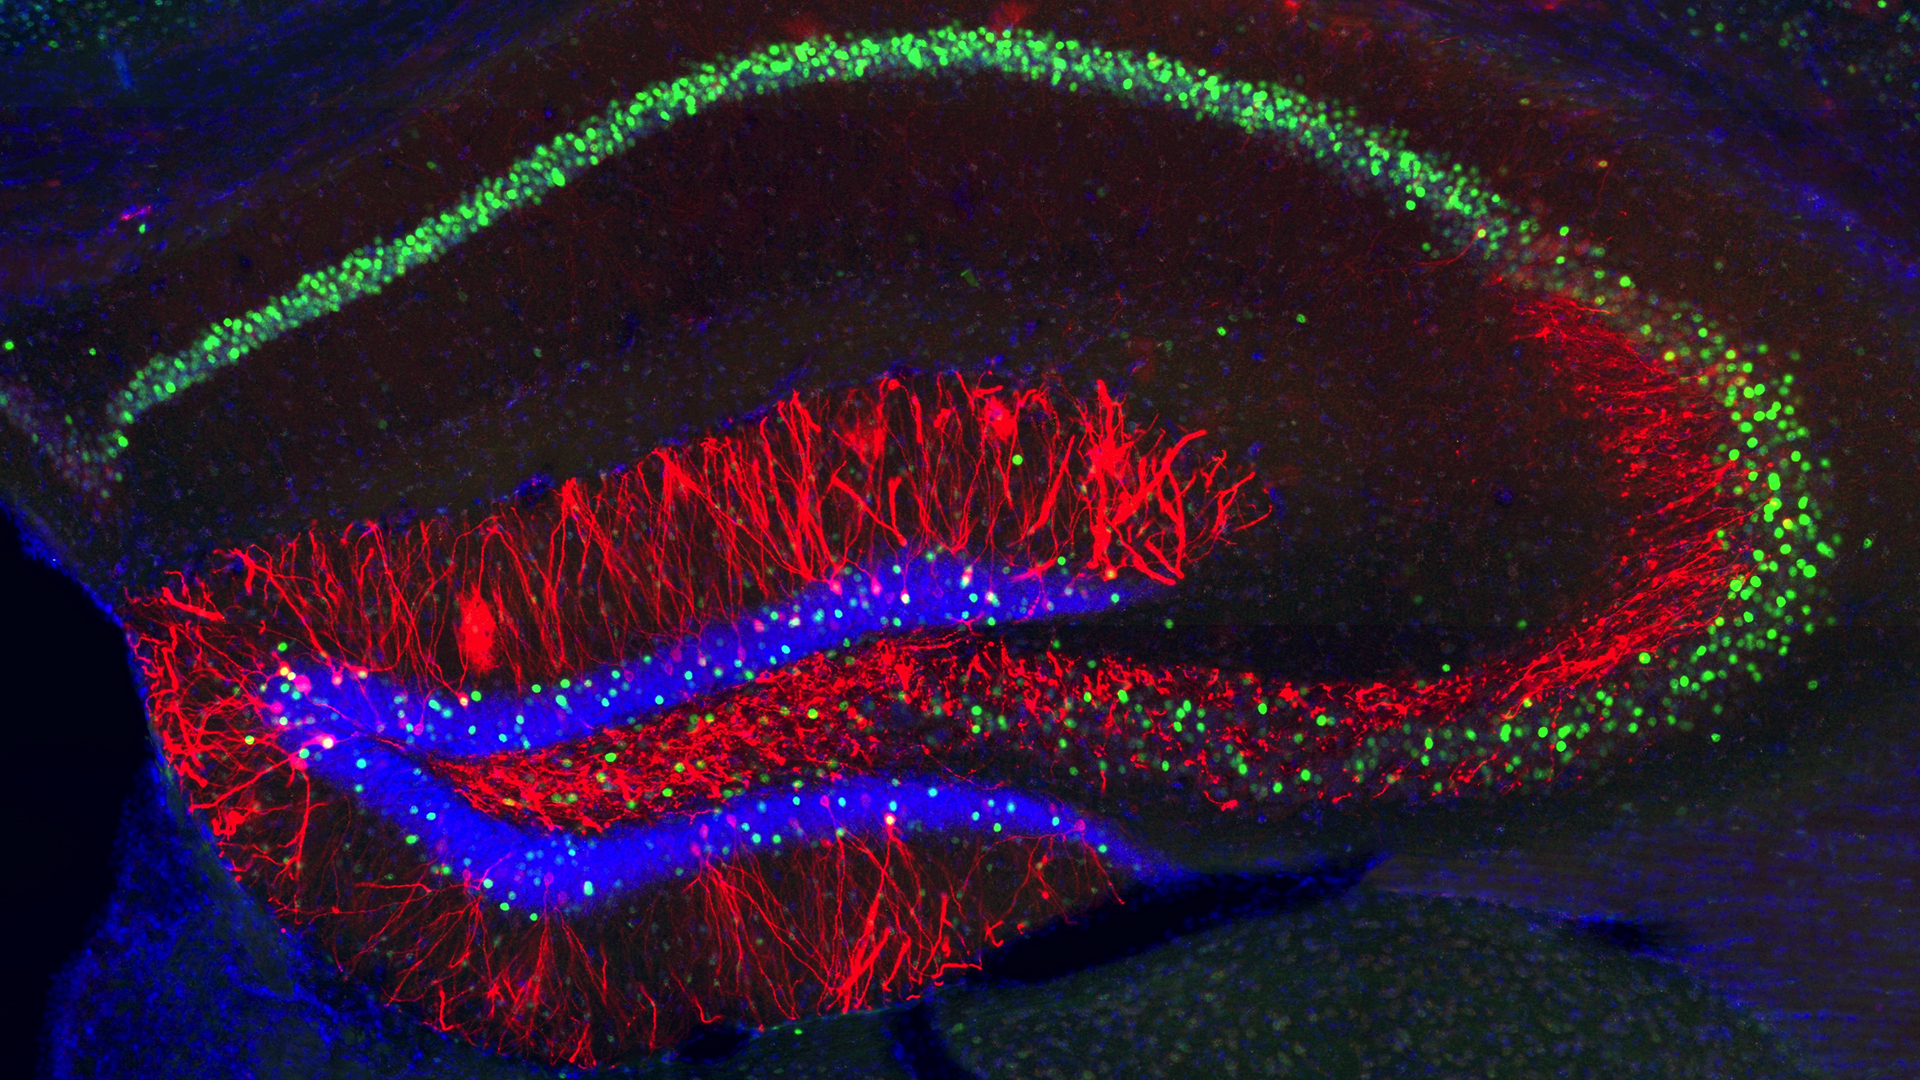 An image of hippocampal stained with red, blue, and green markers